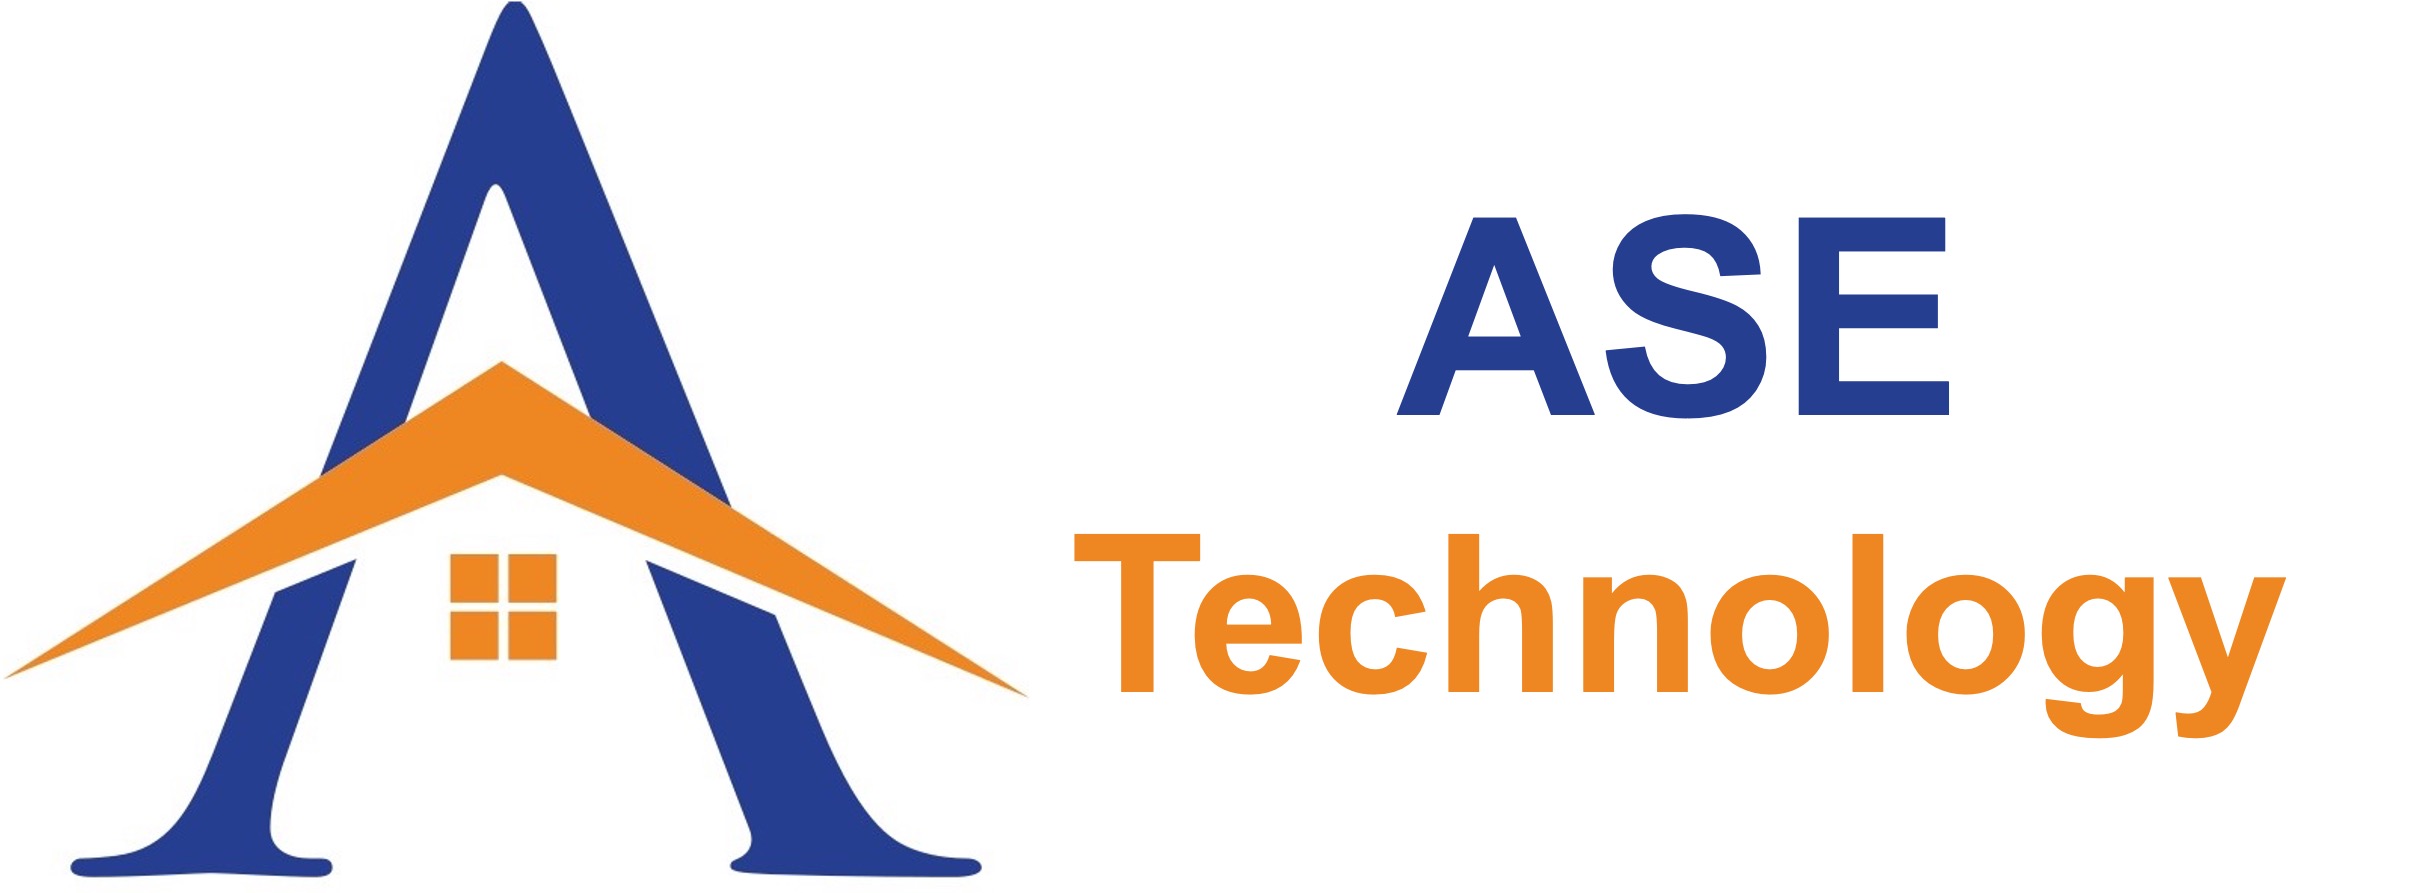 ASE Technology Footer Logo